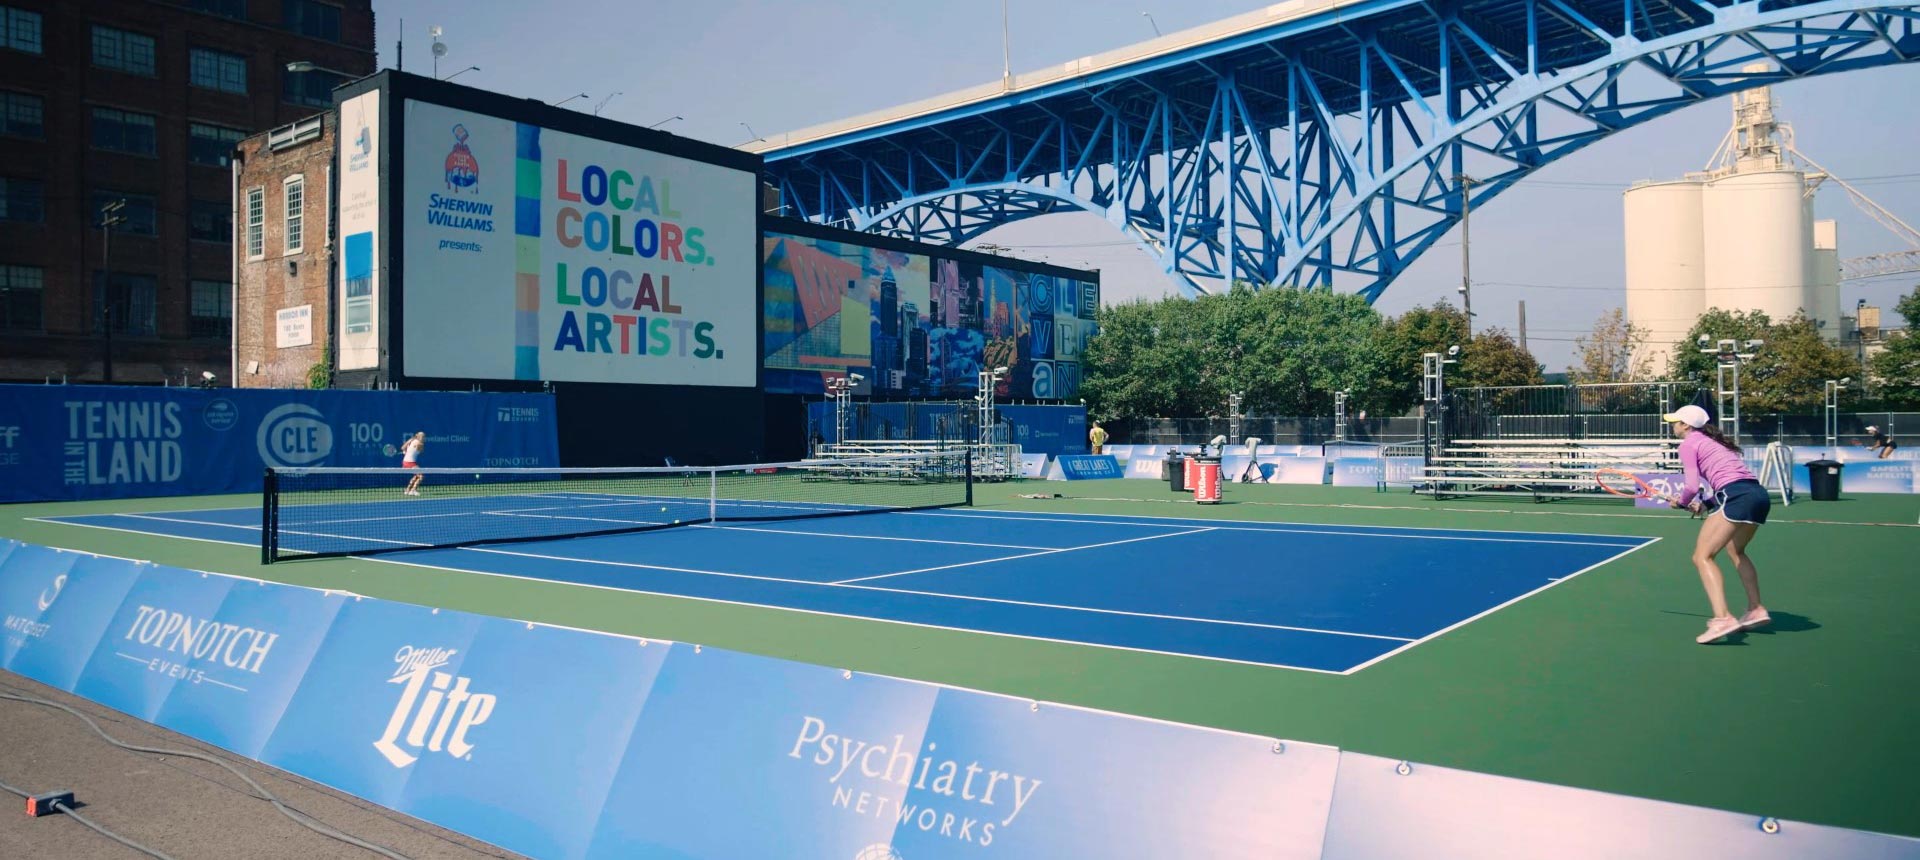 video thumb Vasco Group Plays Key Role in Inaugural WTA Tennis in Land Event